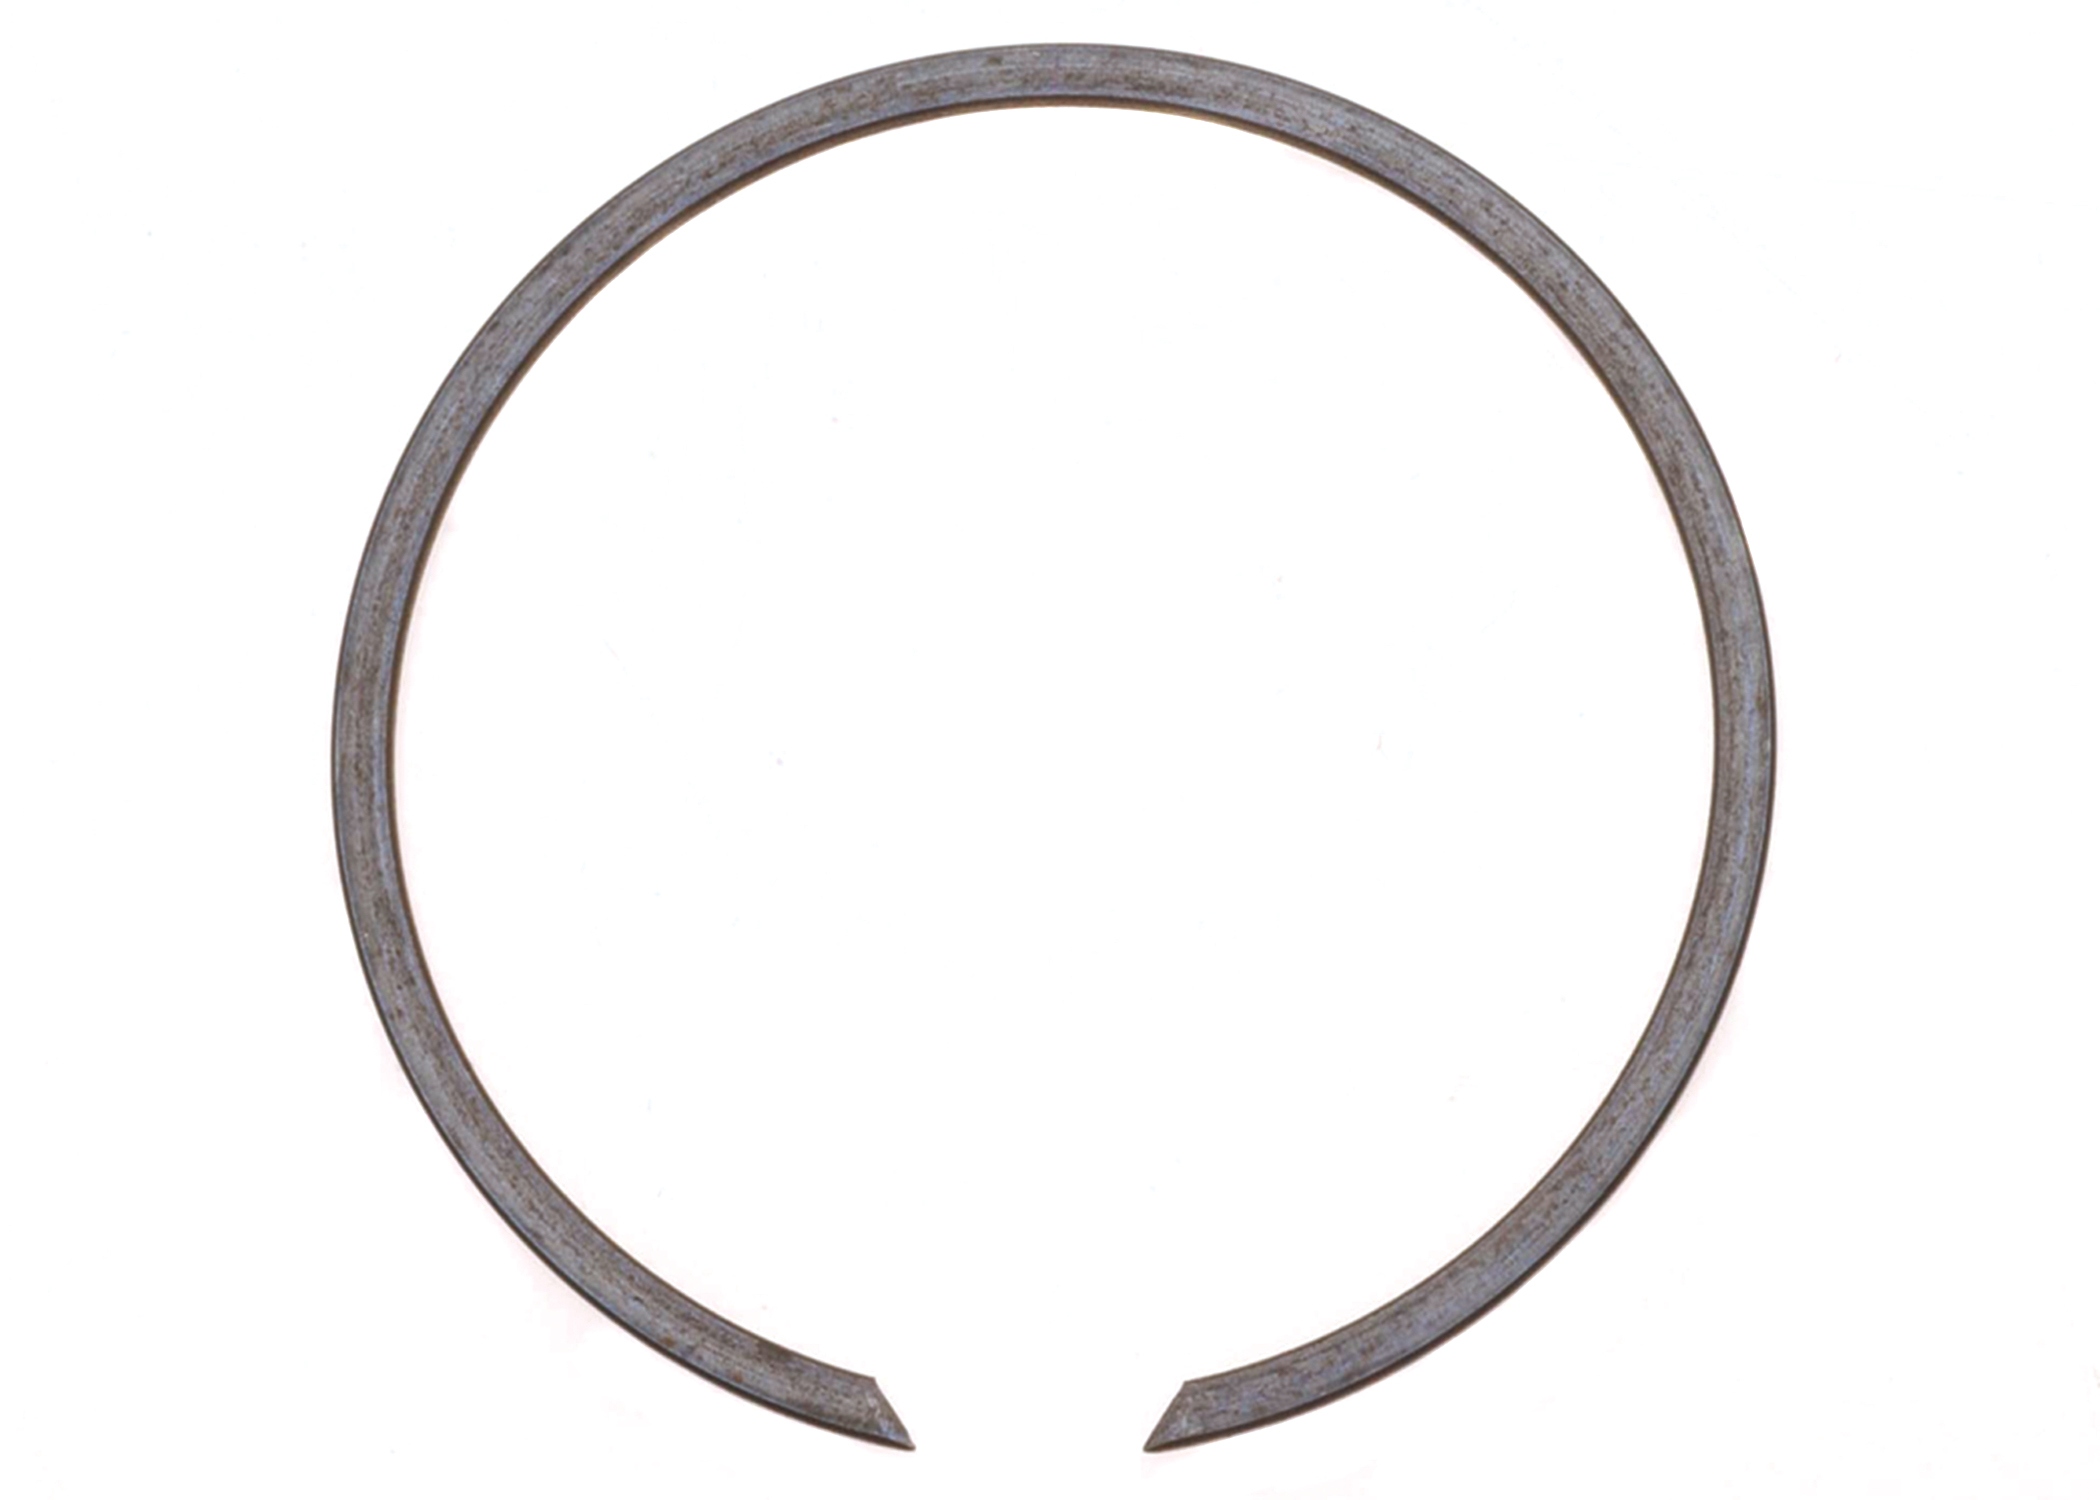 GM GENUINE PARTS CANADA - Automatic Transmission Clutch Spring Retaining Ring - GMC 8647337